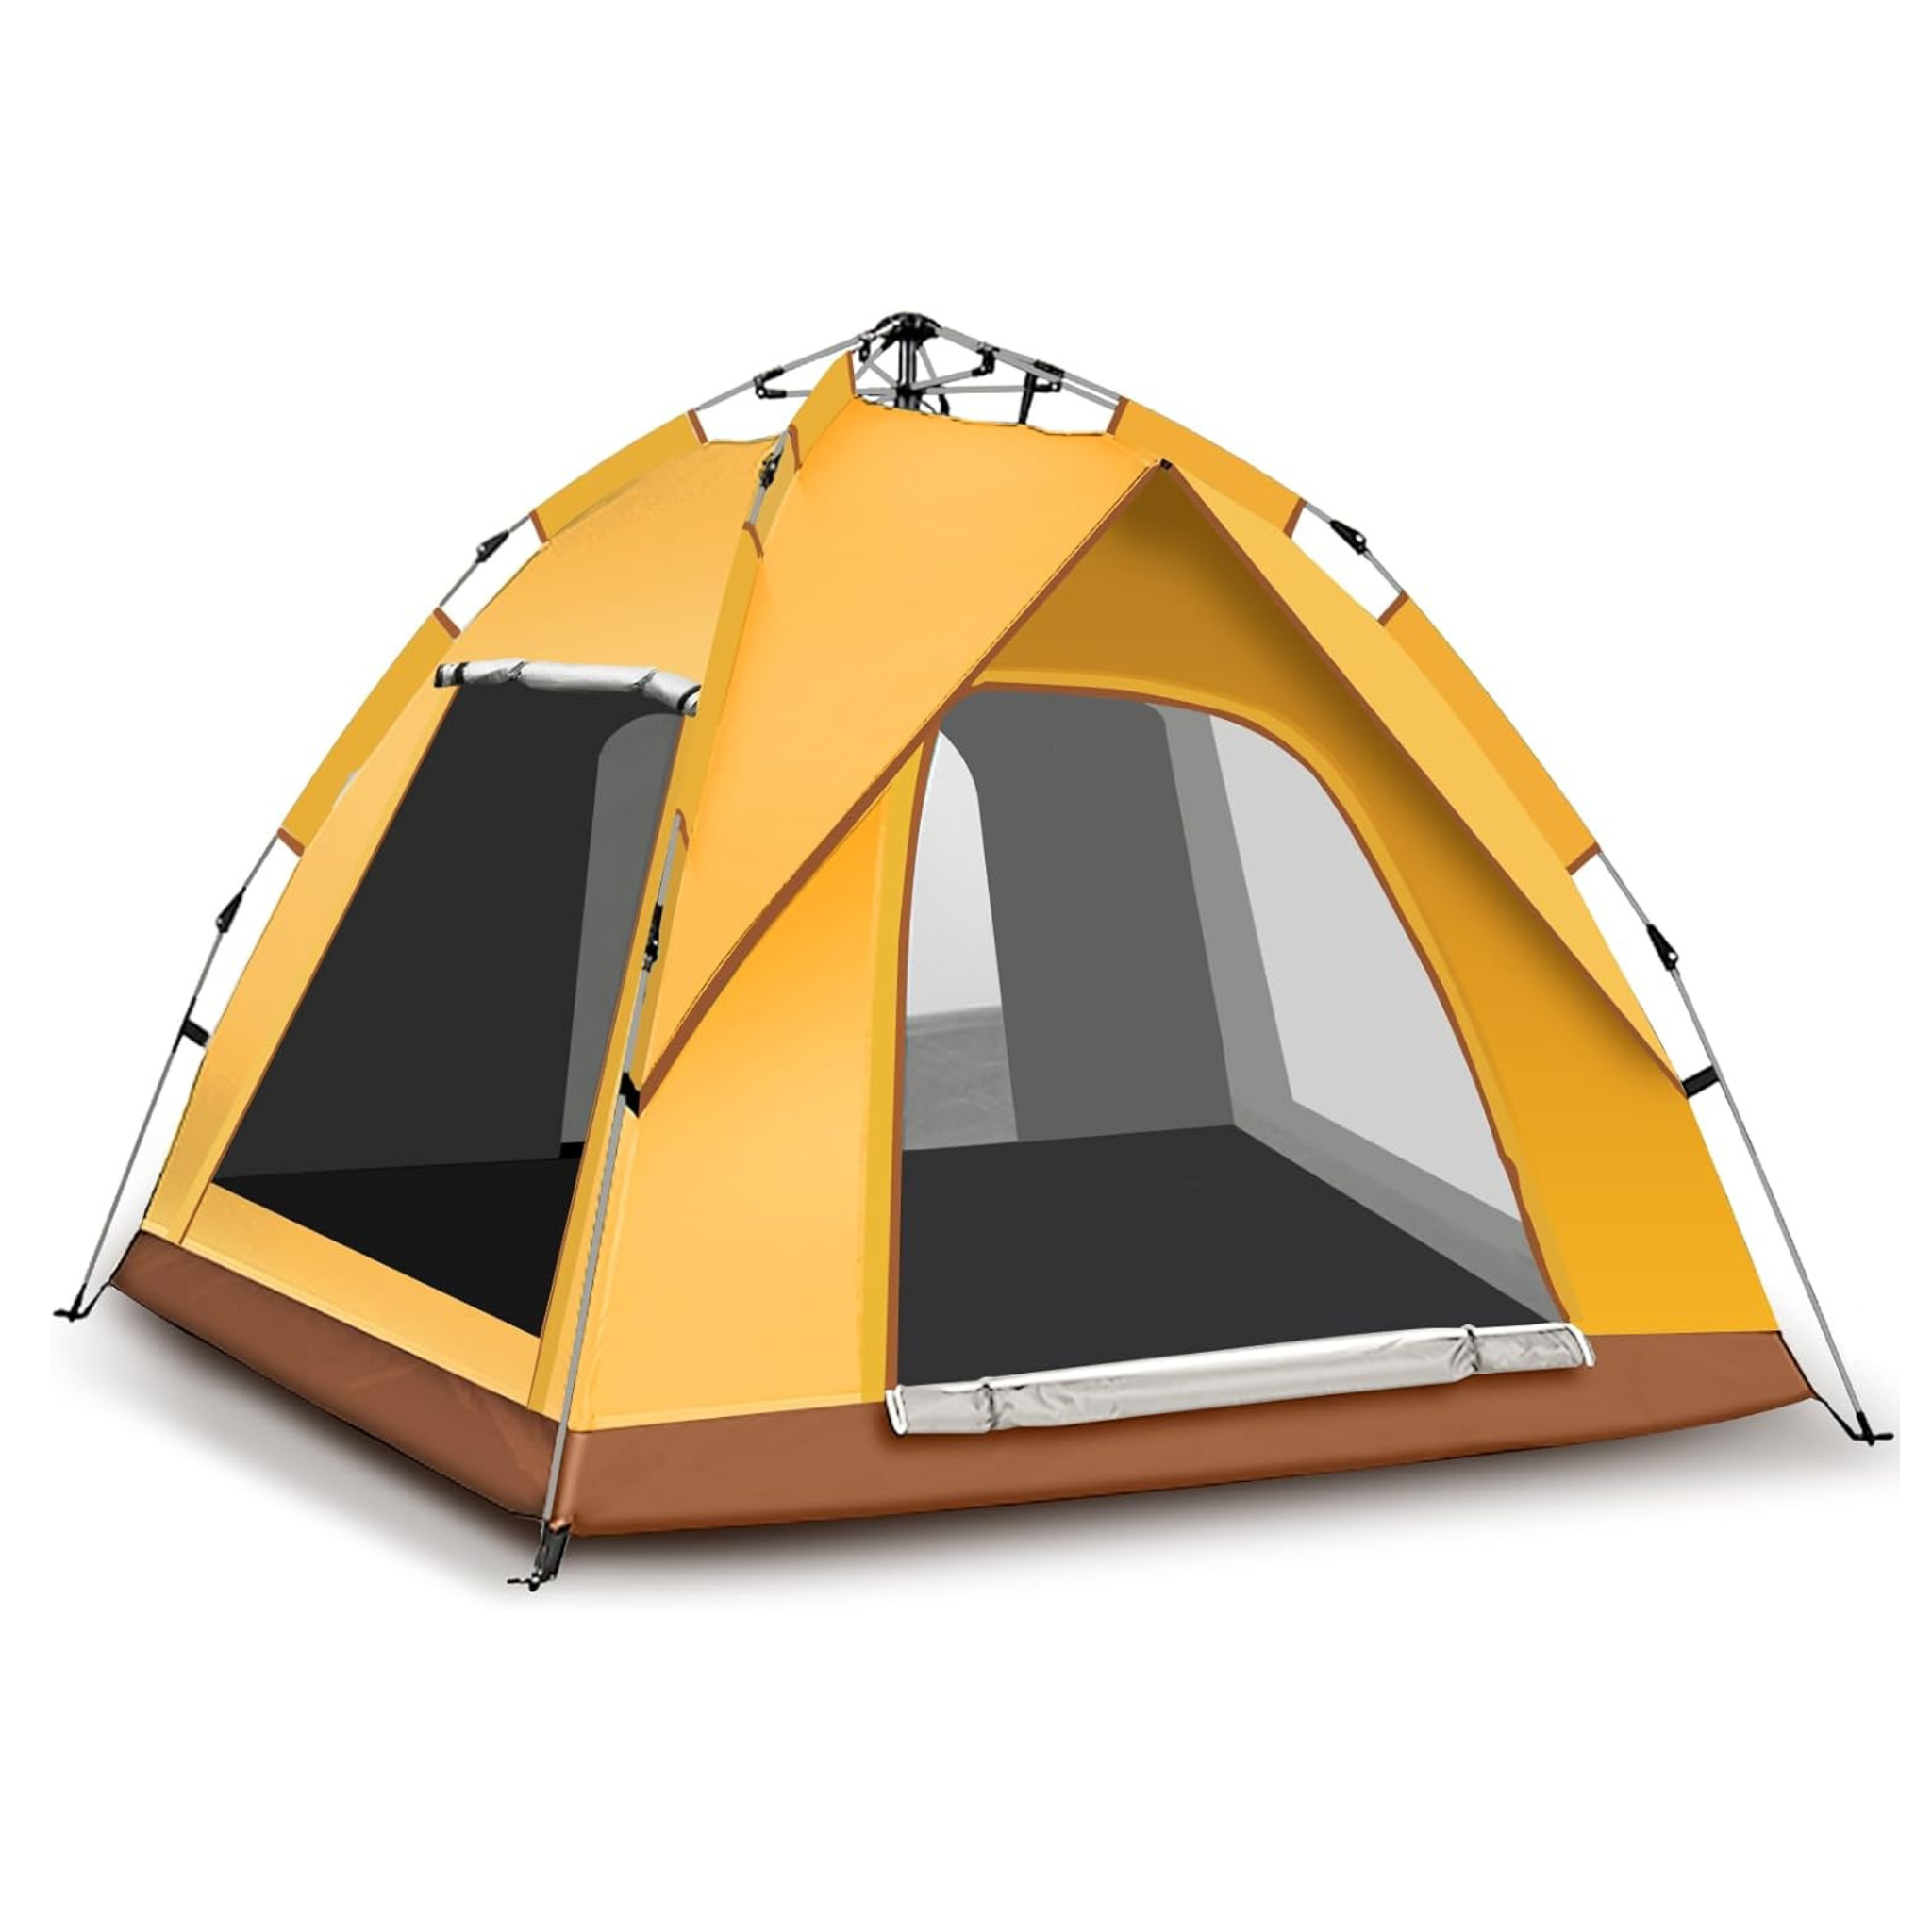 Waterproof 2/3 Person Portable Camping Tent